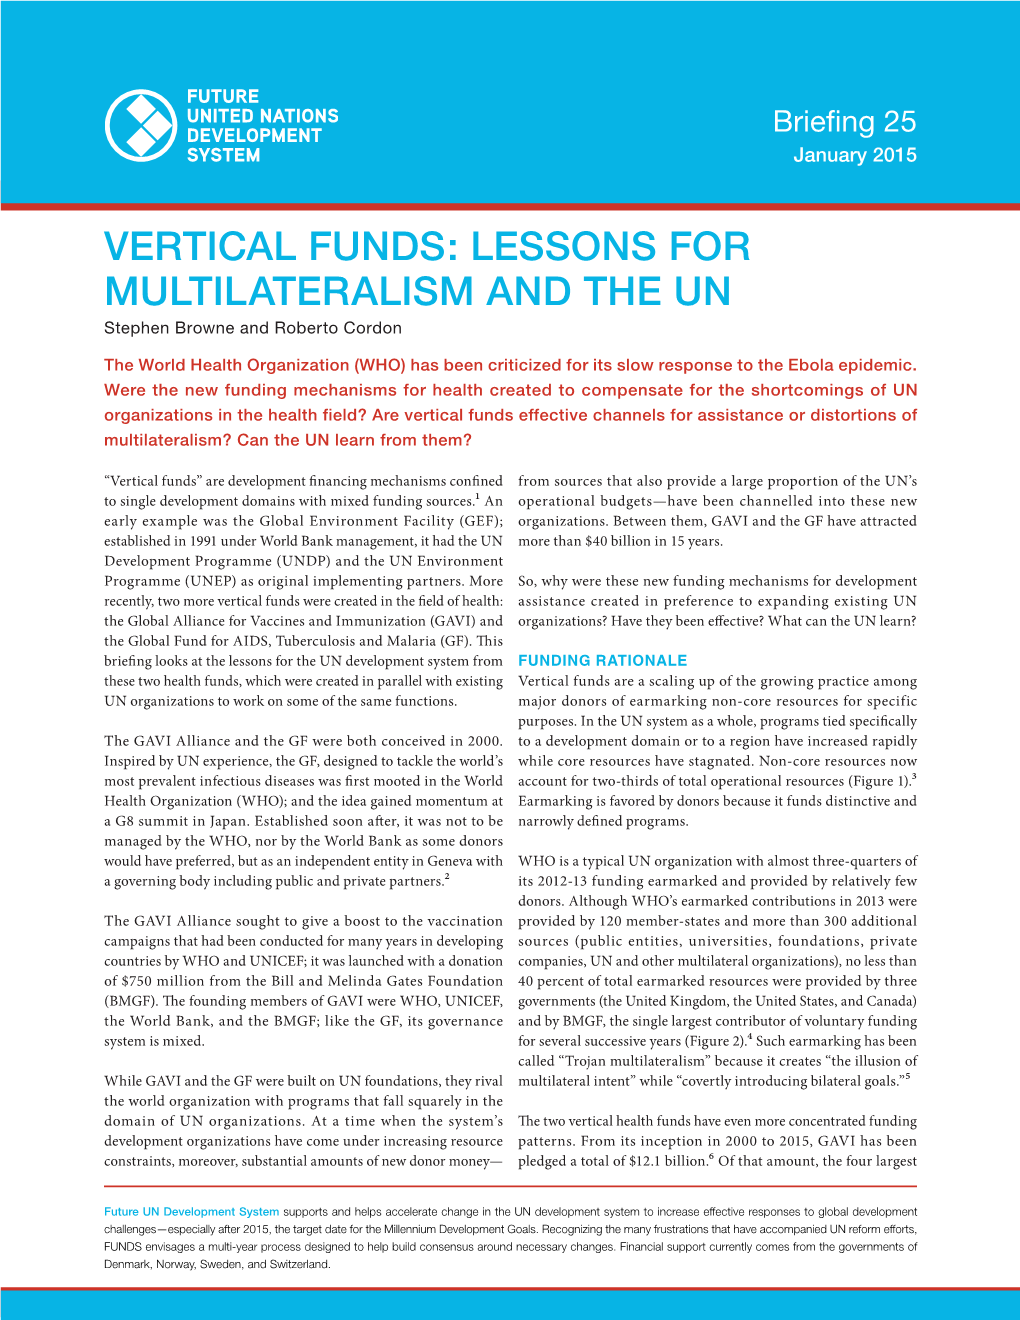 VERTICAL FUNDS: LESSONS for MULTILATERALISM and the UN Stephen Browne and Roberto Cordon